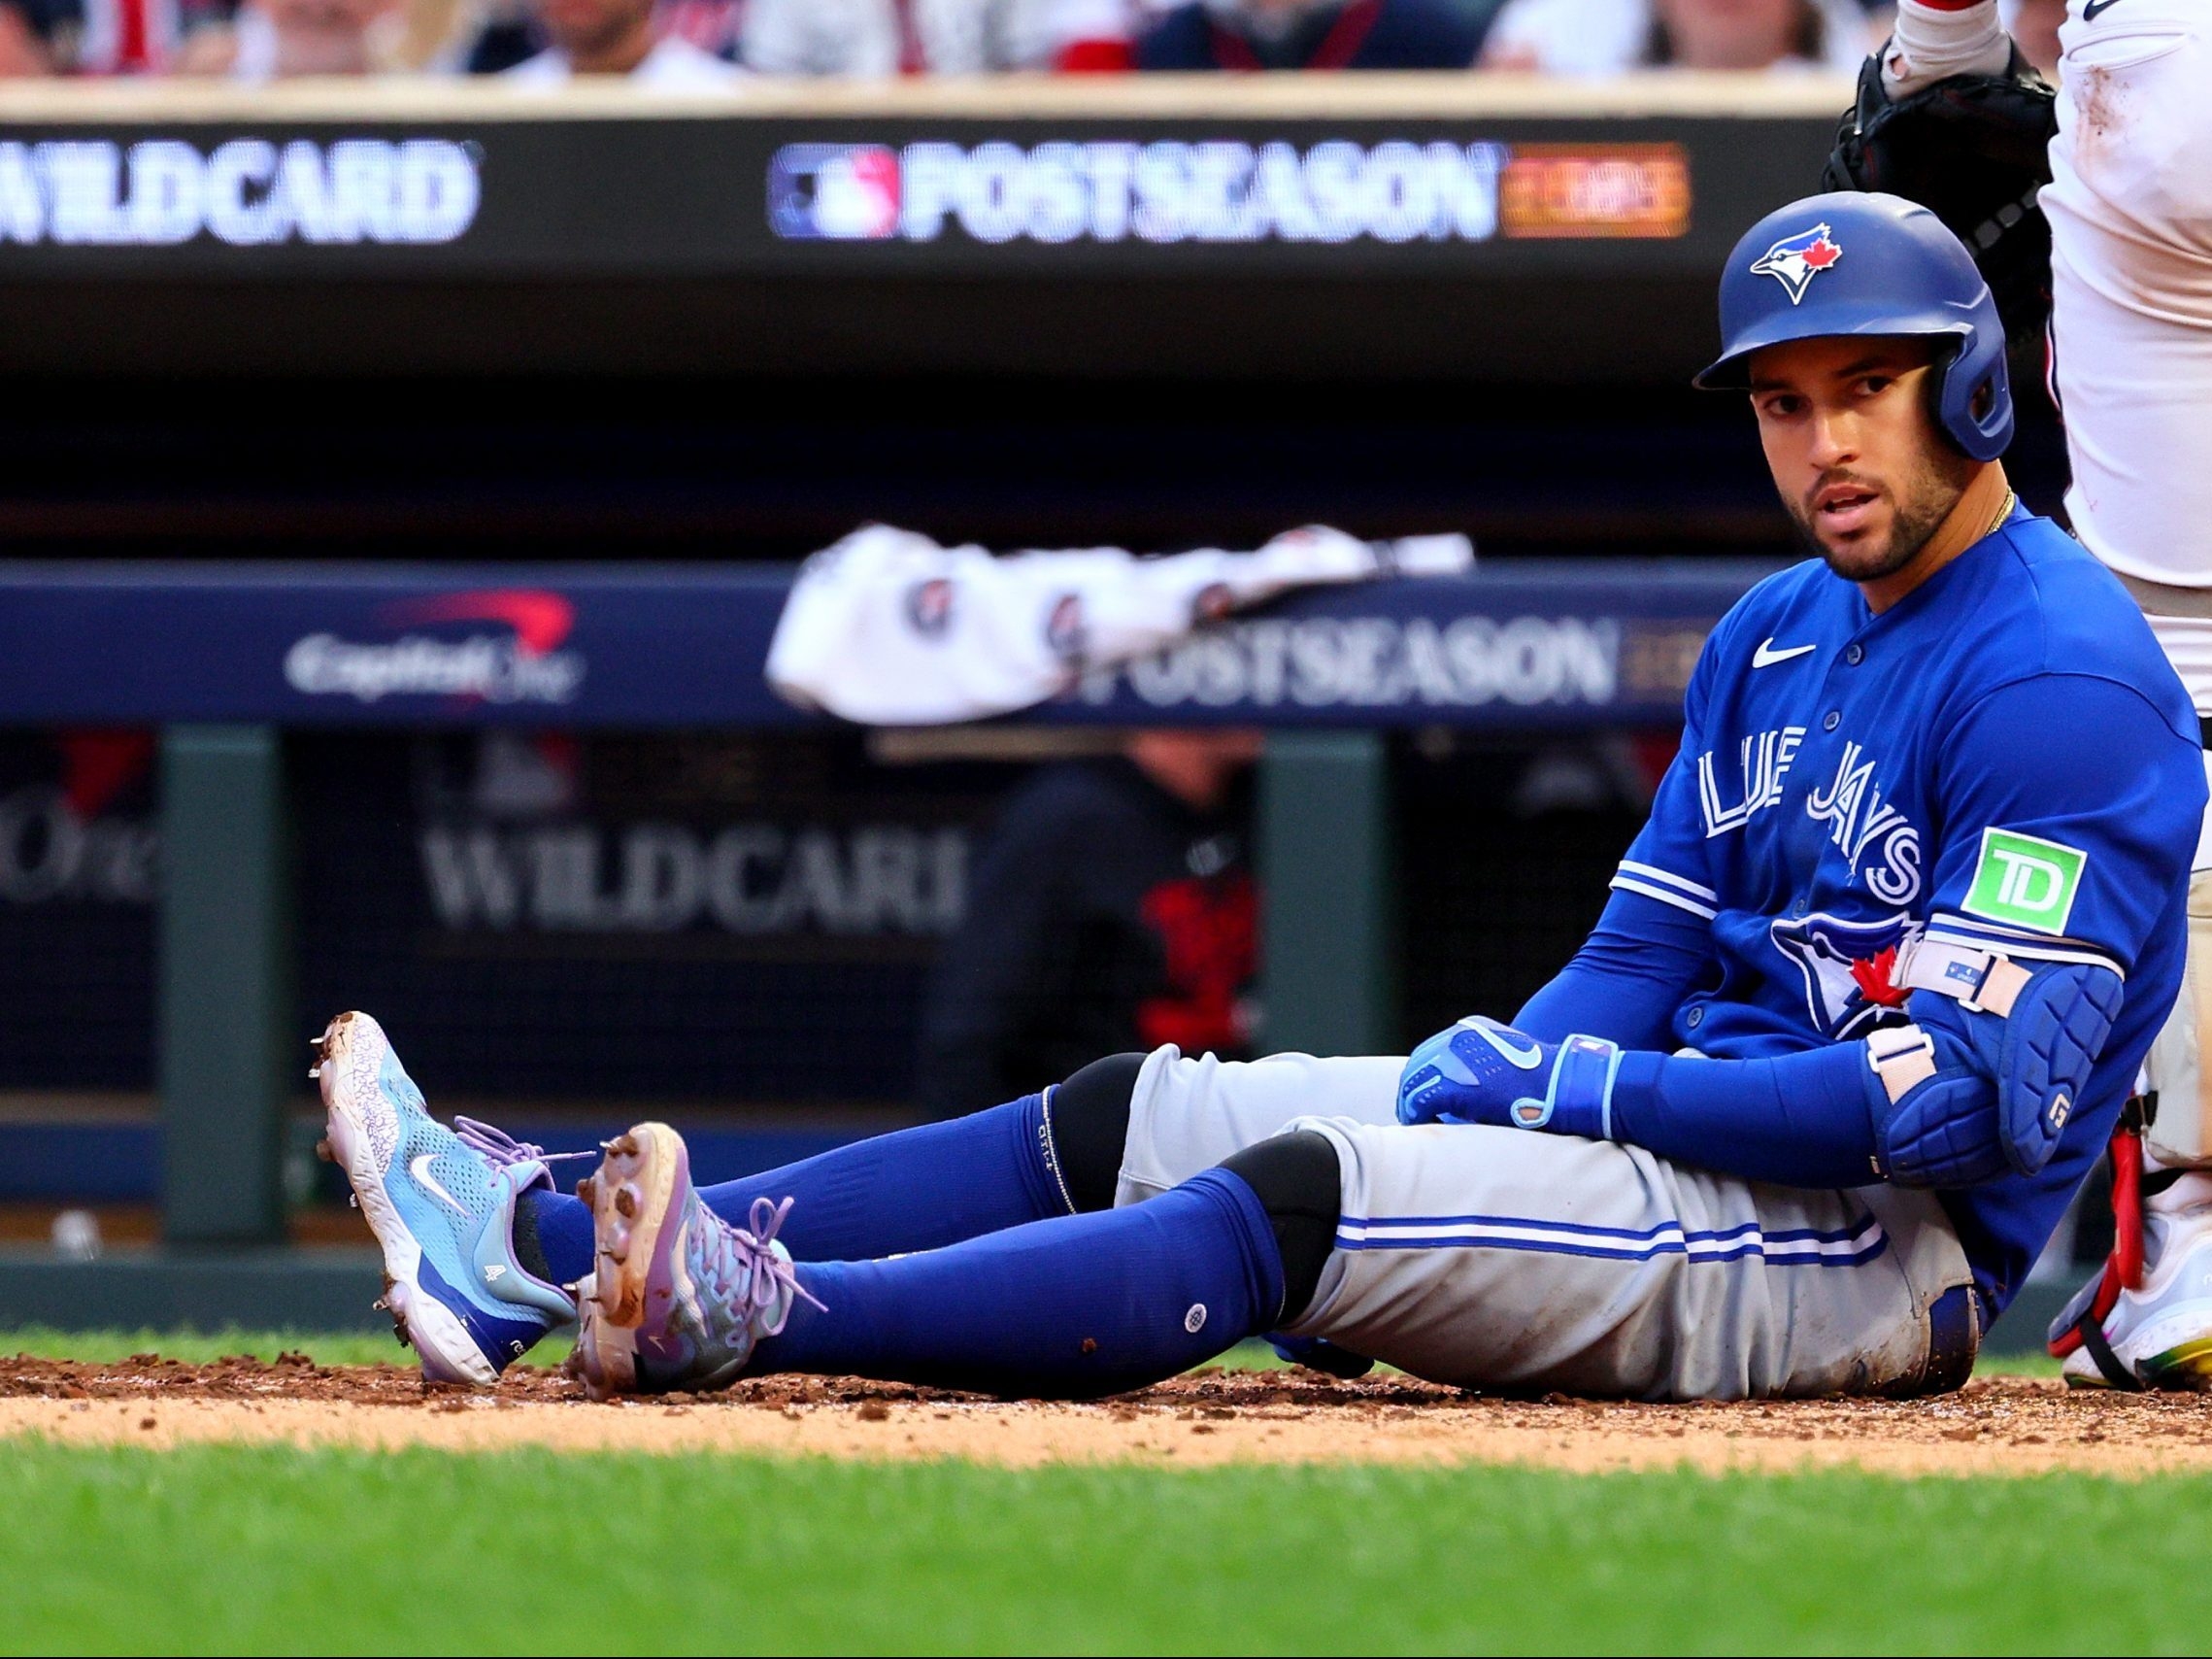 Toronto Blue Jays lose to Minnesota Twins in Game 1